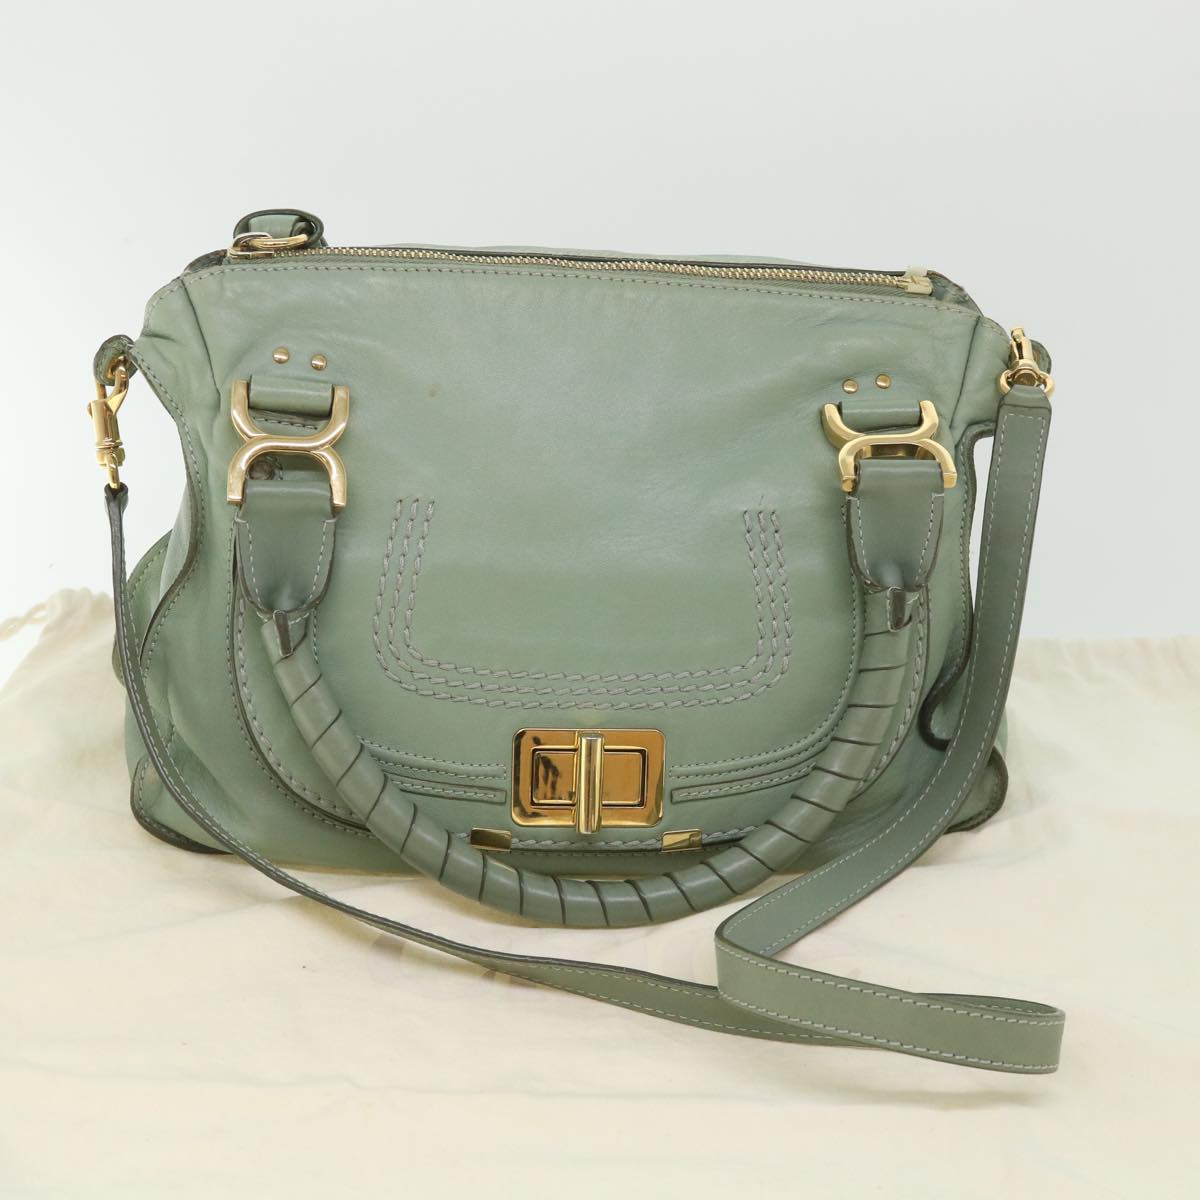 Chloe Mercy Shoulder Bag Leather 2way Green Auth 56669